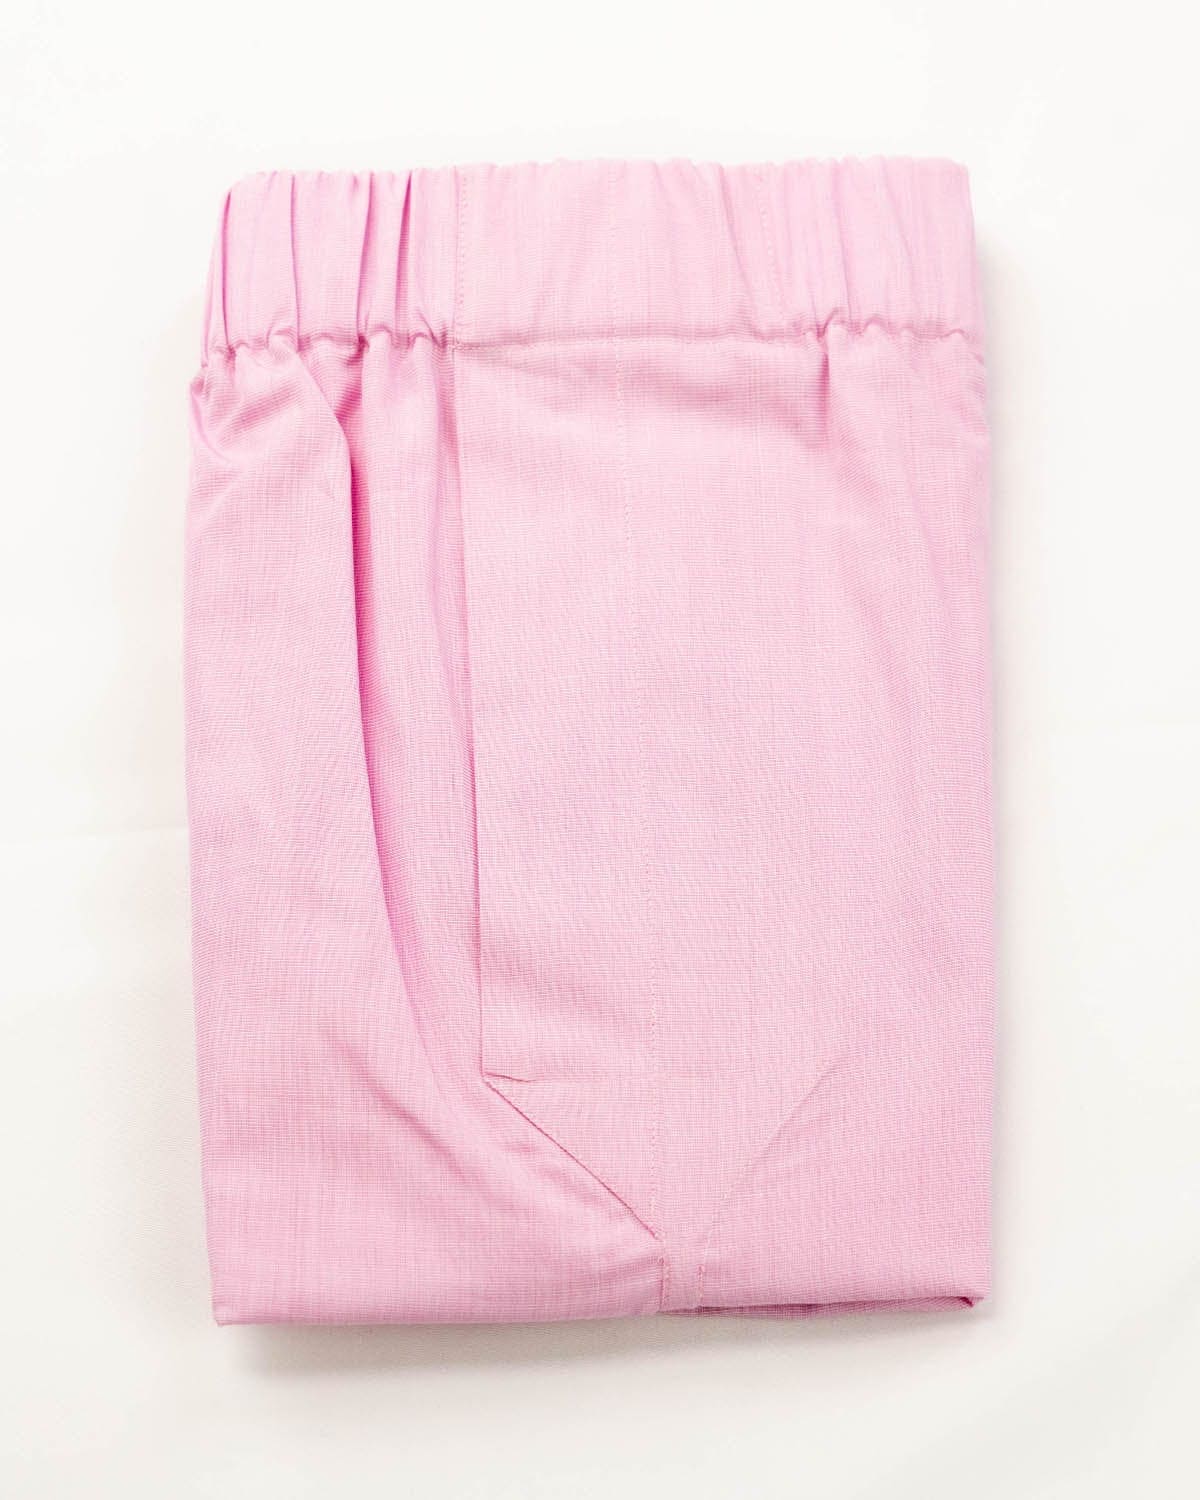 Boxer Shorts - Pink End on End